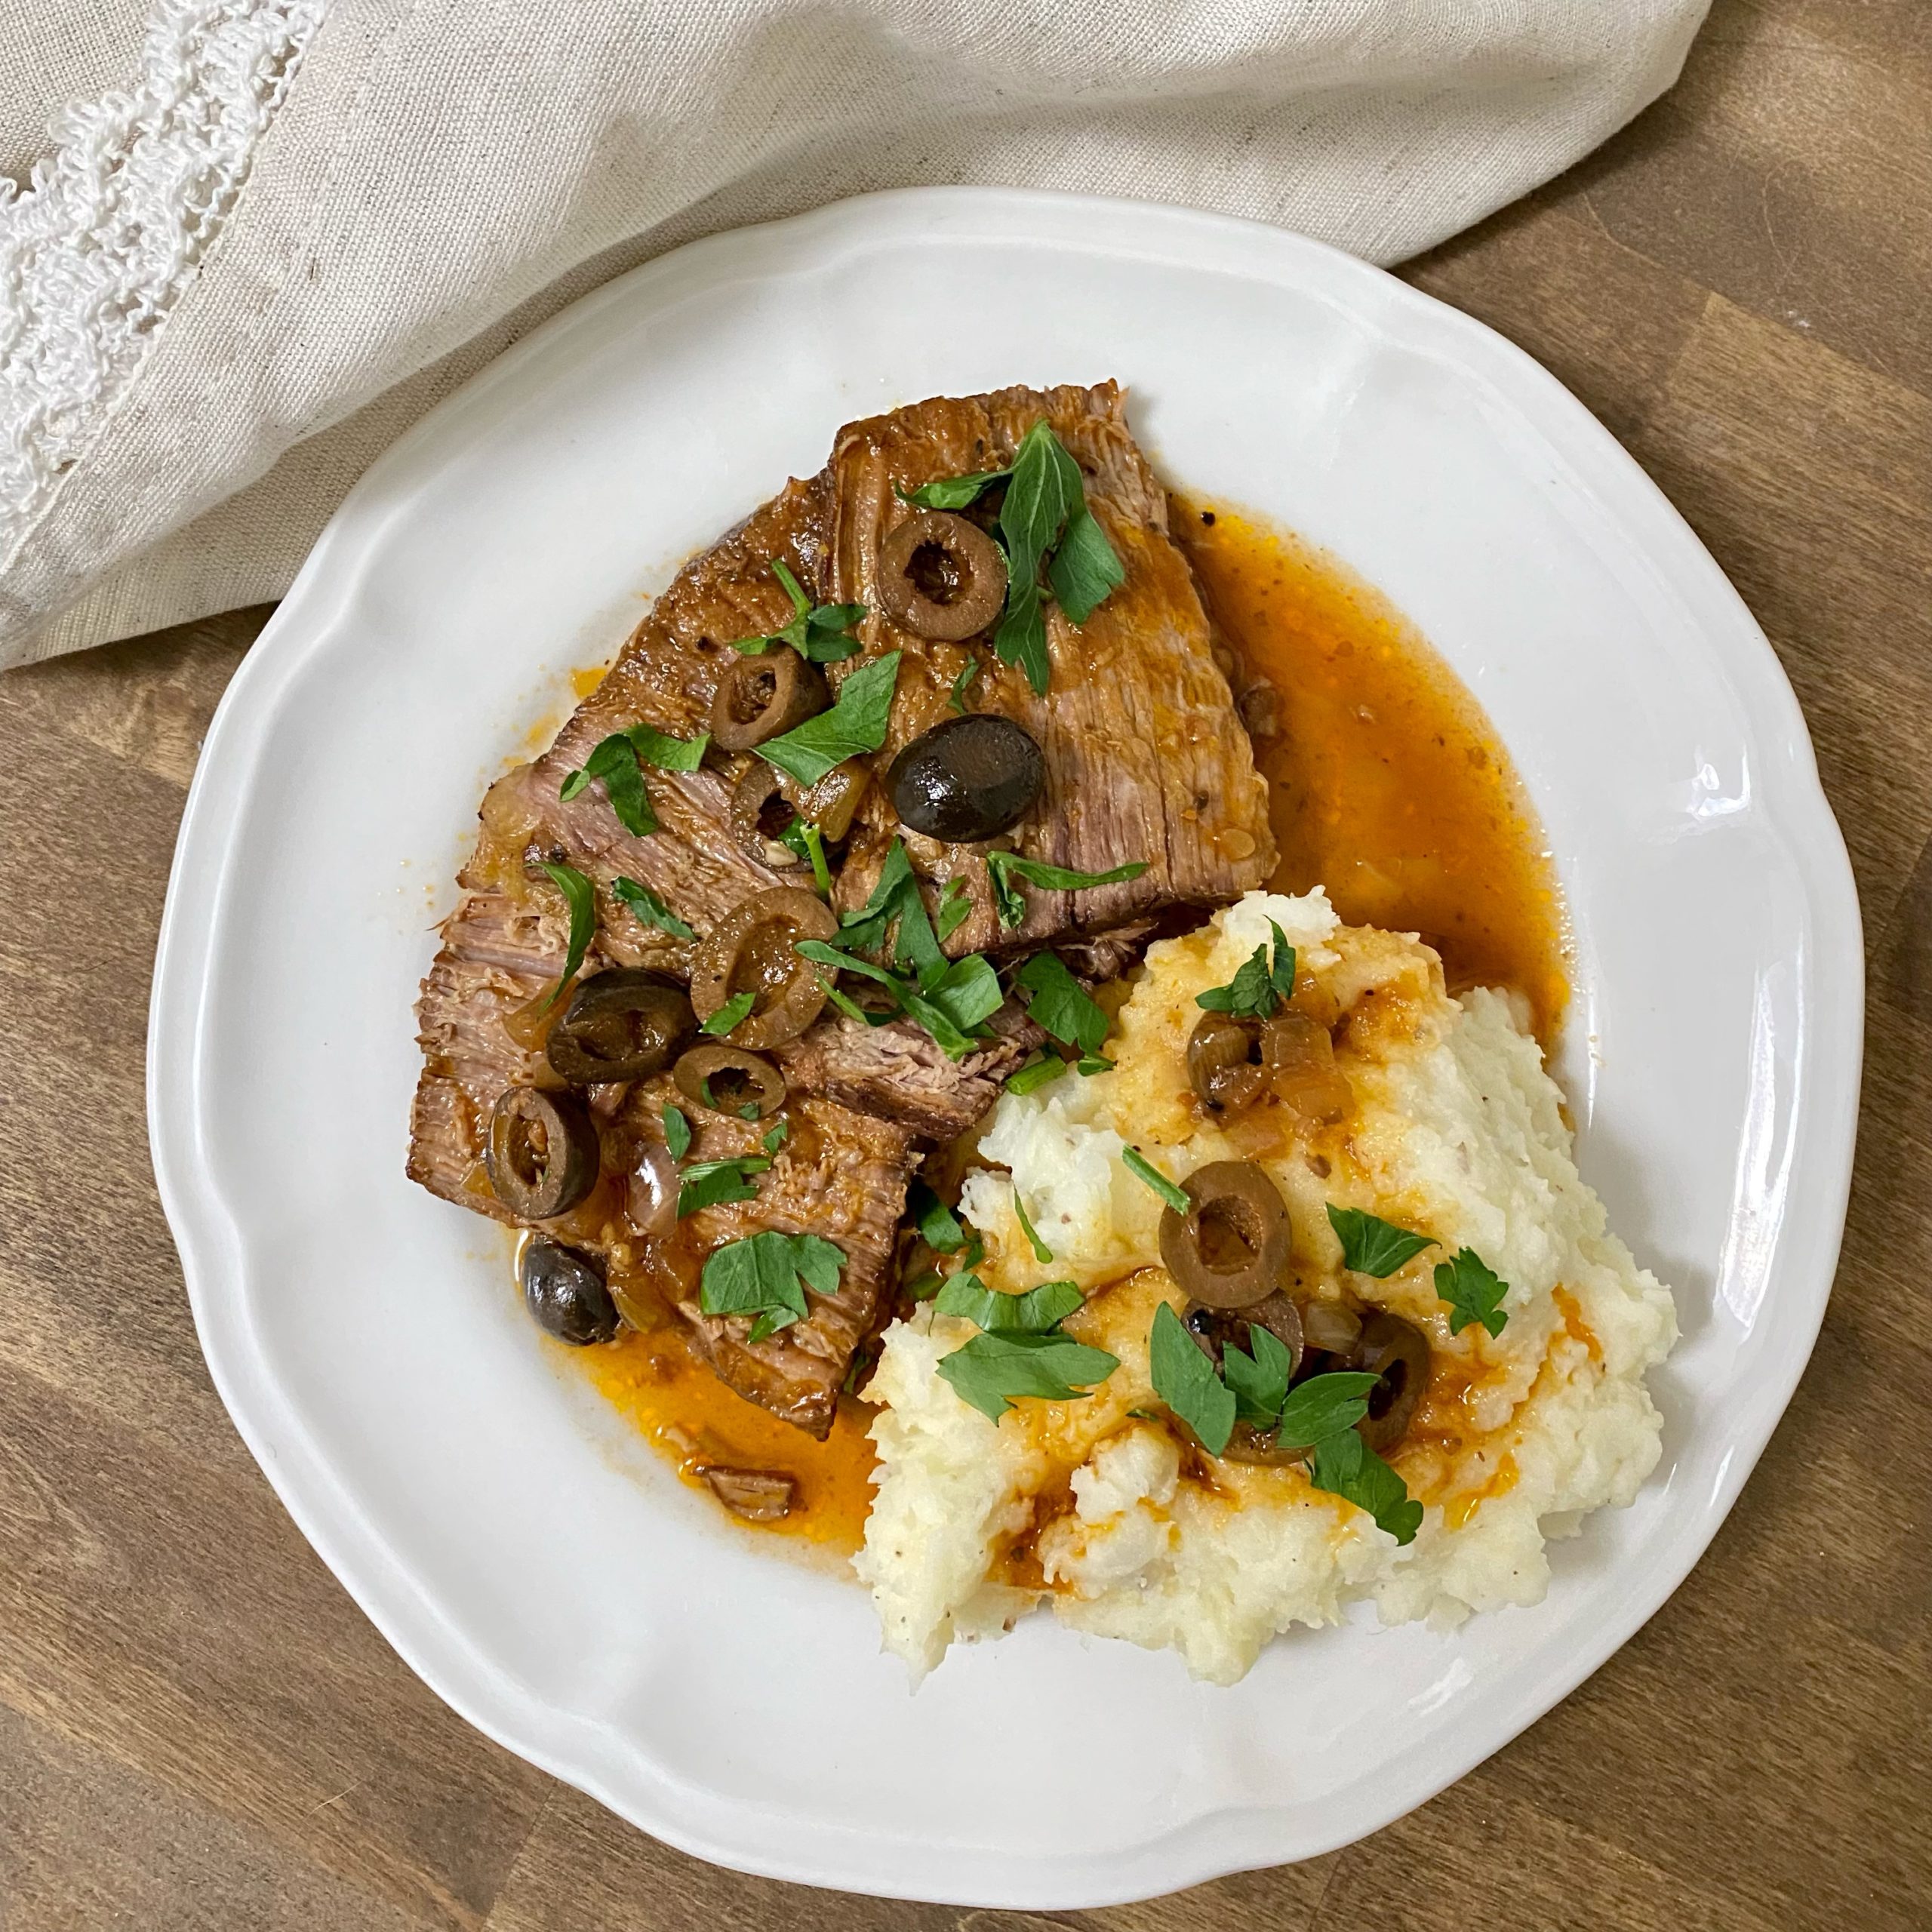 Italian pot roast on a white plate with mashed potatoes and gravey garnished with fresh chopped parsley.